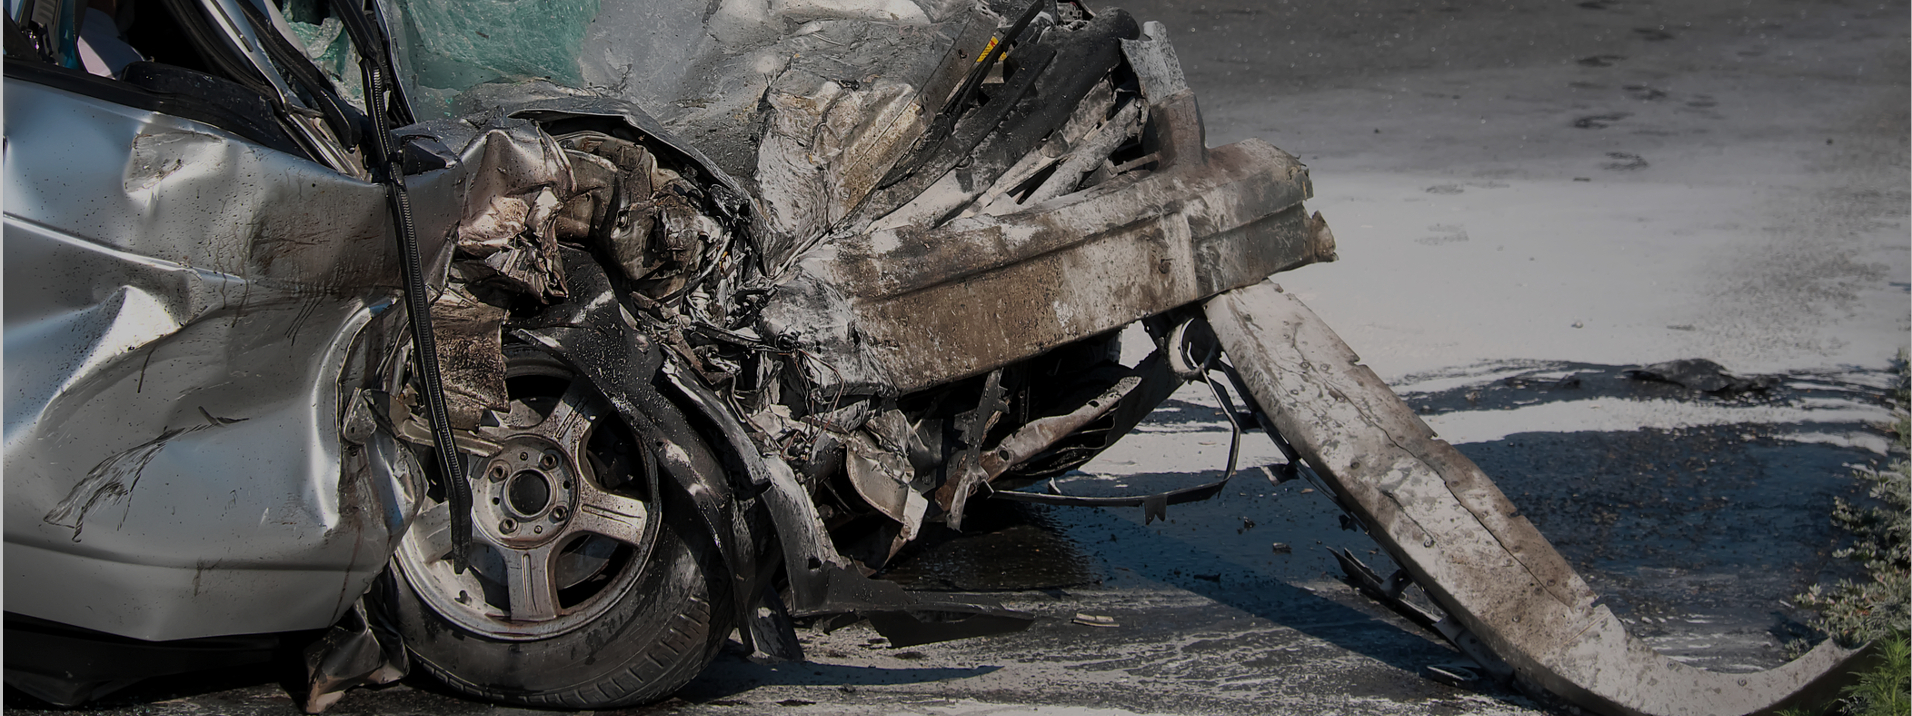 Car Accident Lawyer in Miami, FL - Hannon Legal Group